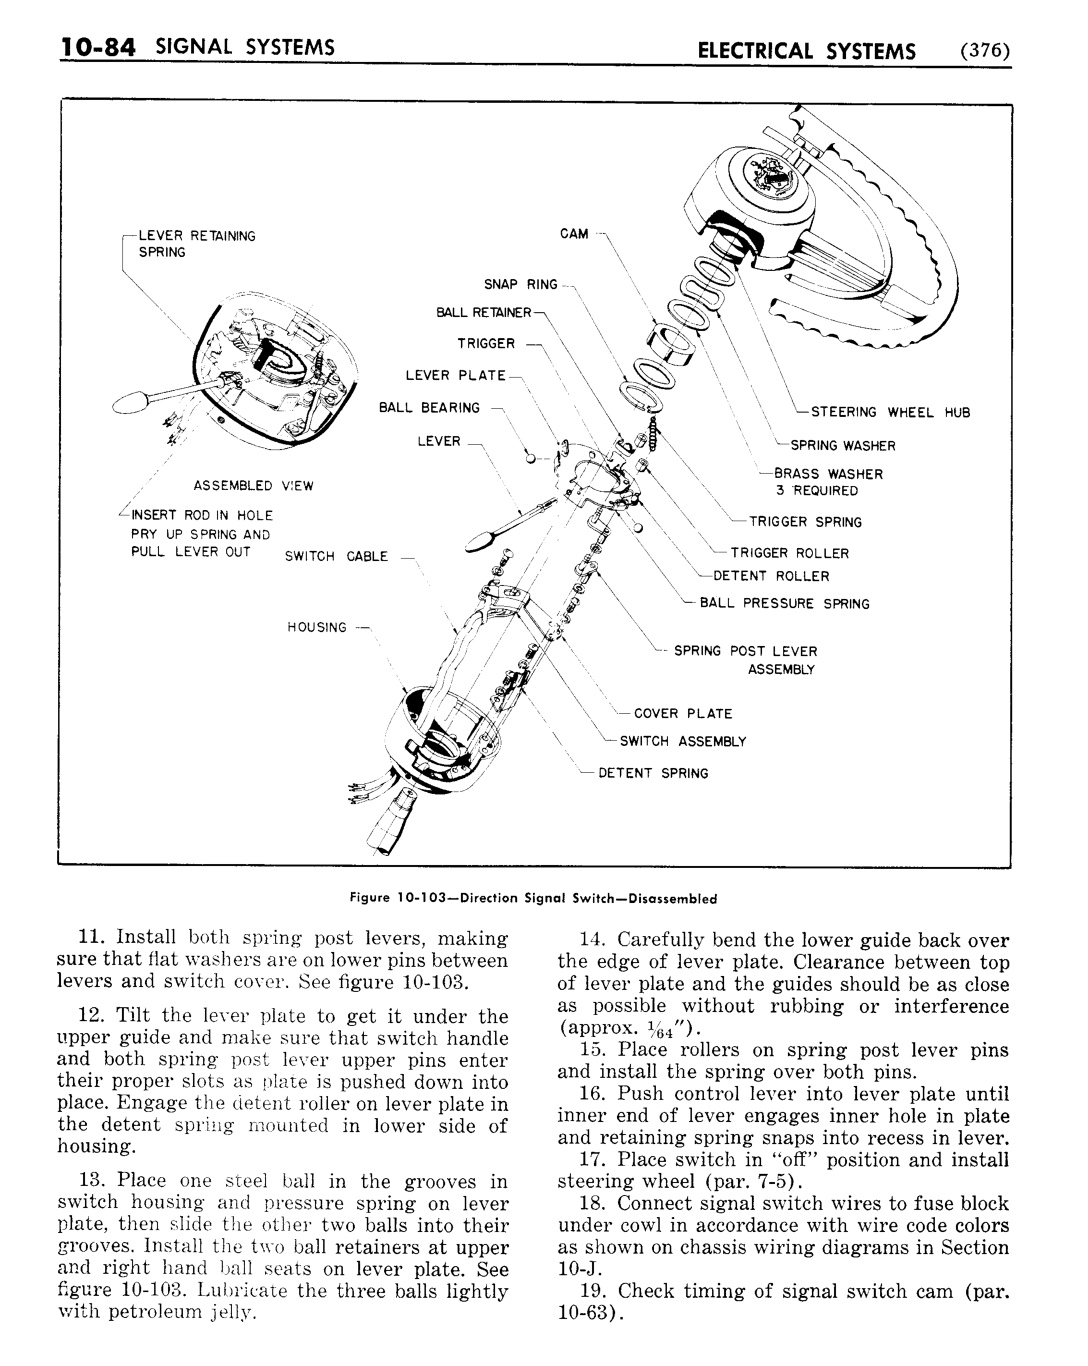 n_11 1951 Buick Shop Manual - Electrical Systems-084-084.jpg